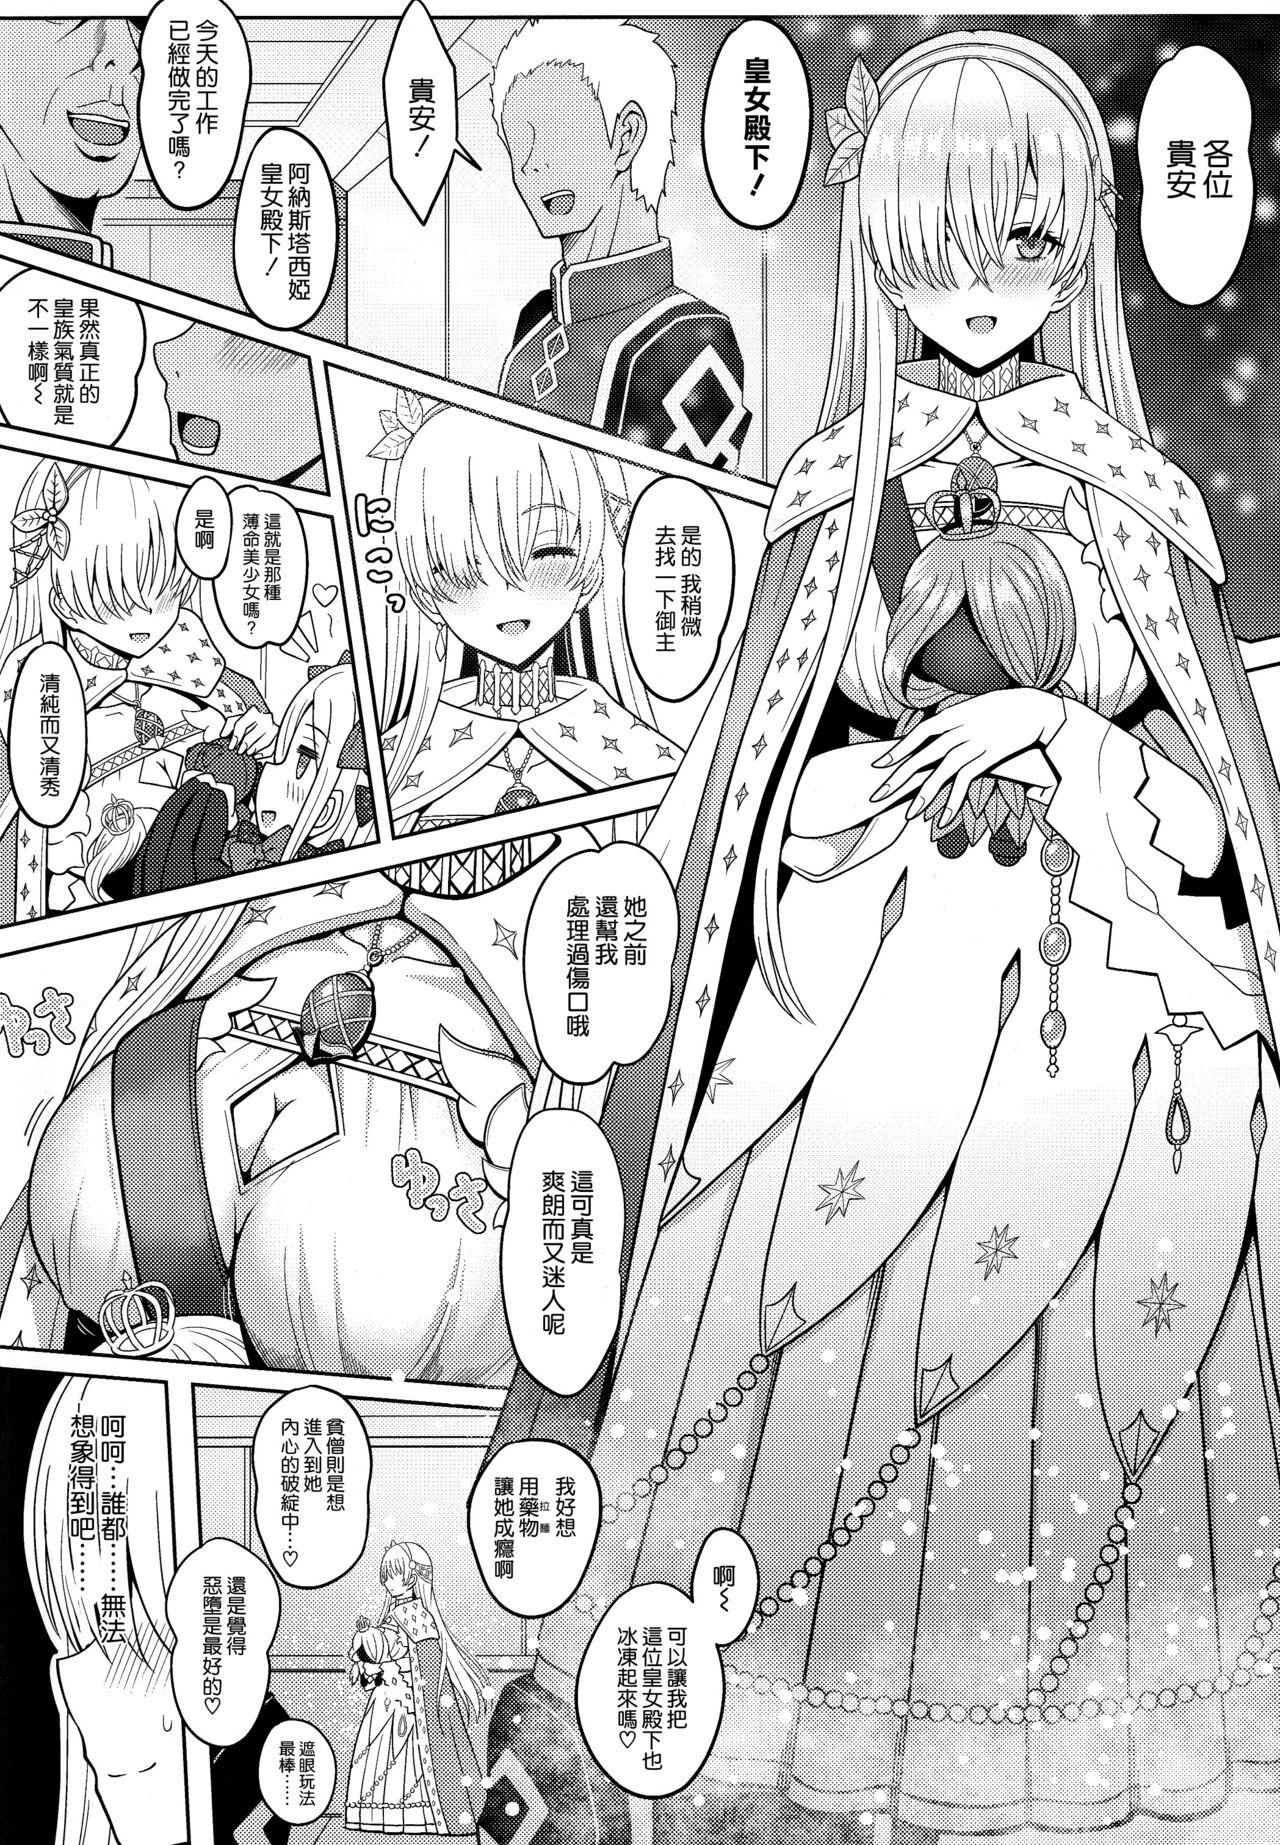 Classy 皇女様と卵 - Fate grand order Gaygroupsex - Page 4